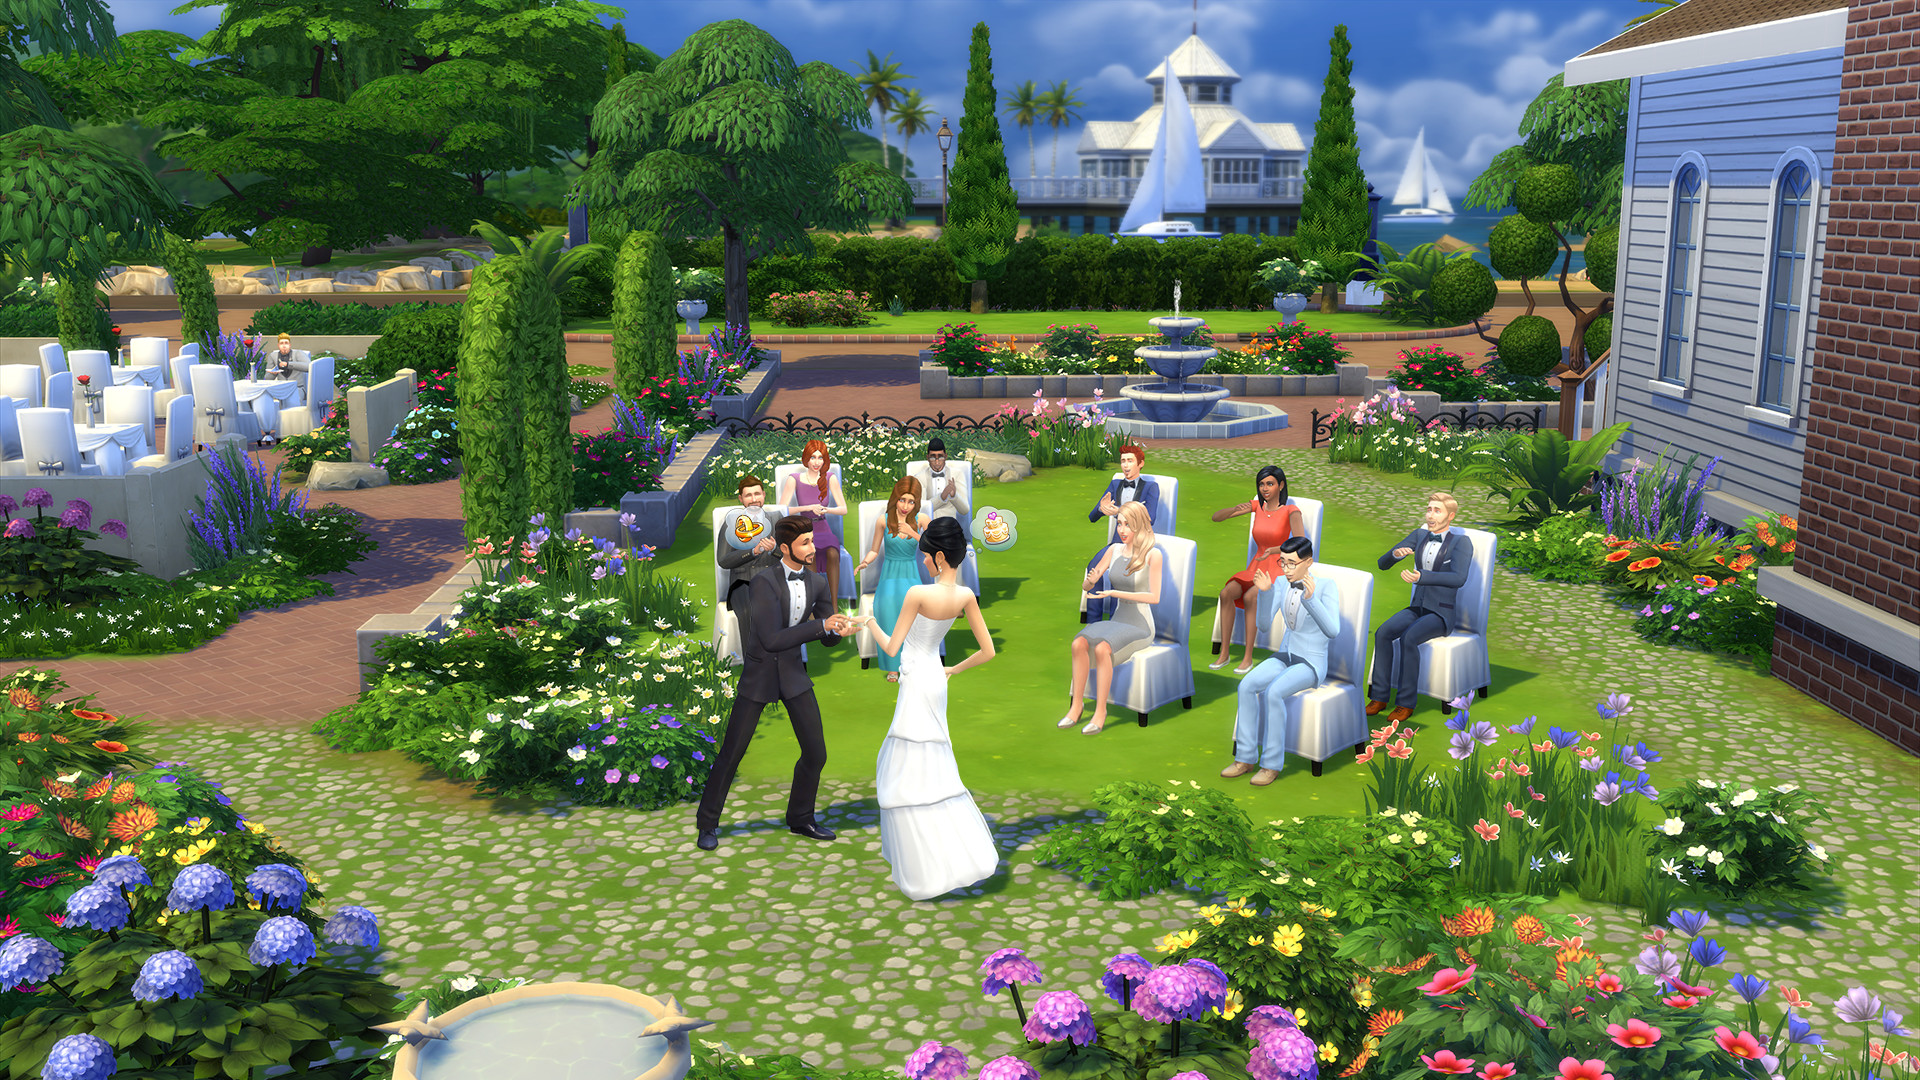 The Sims 4 roadmap is “focused on improving content that is in the game”